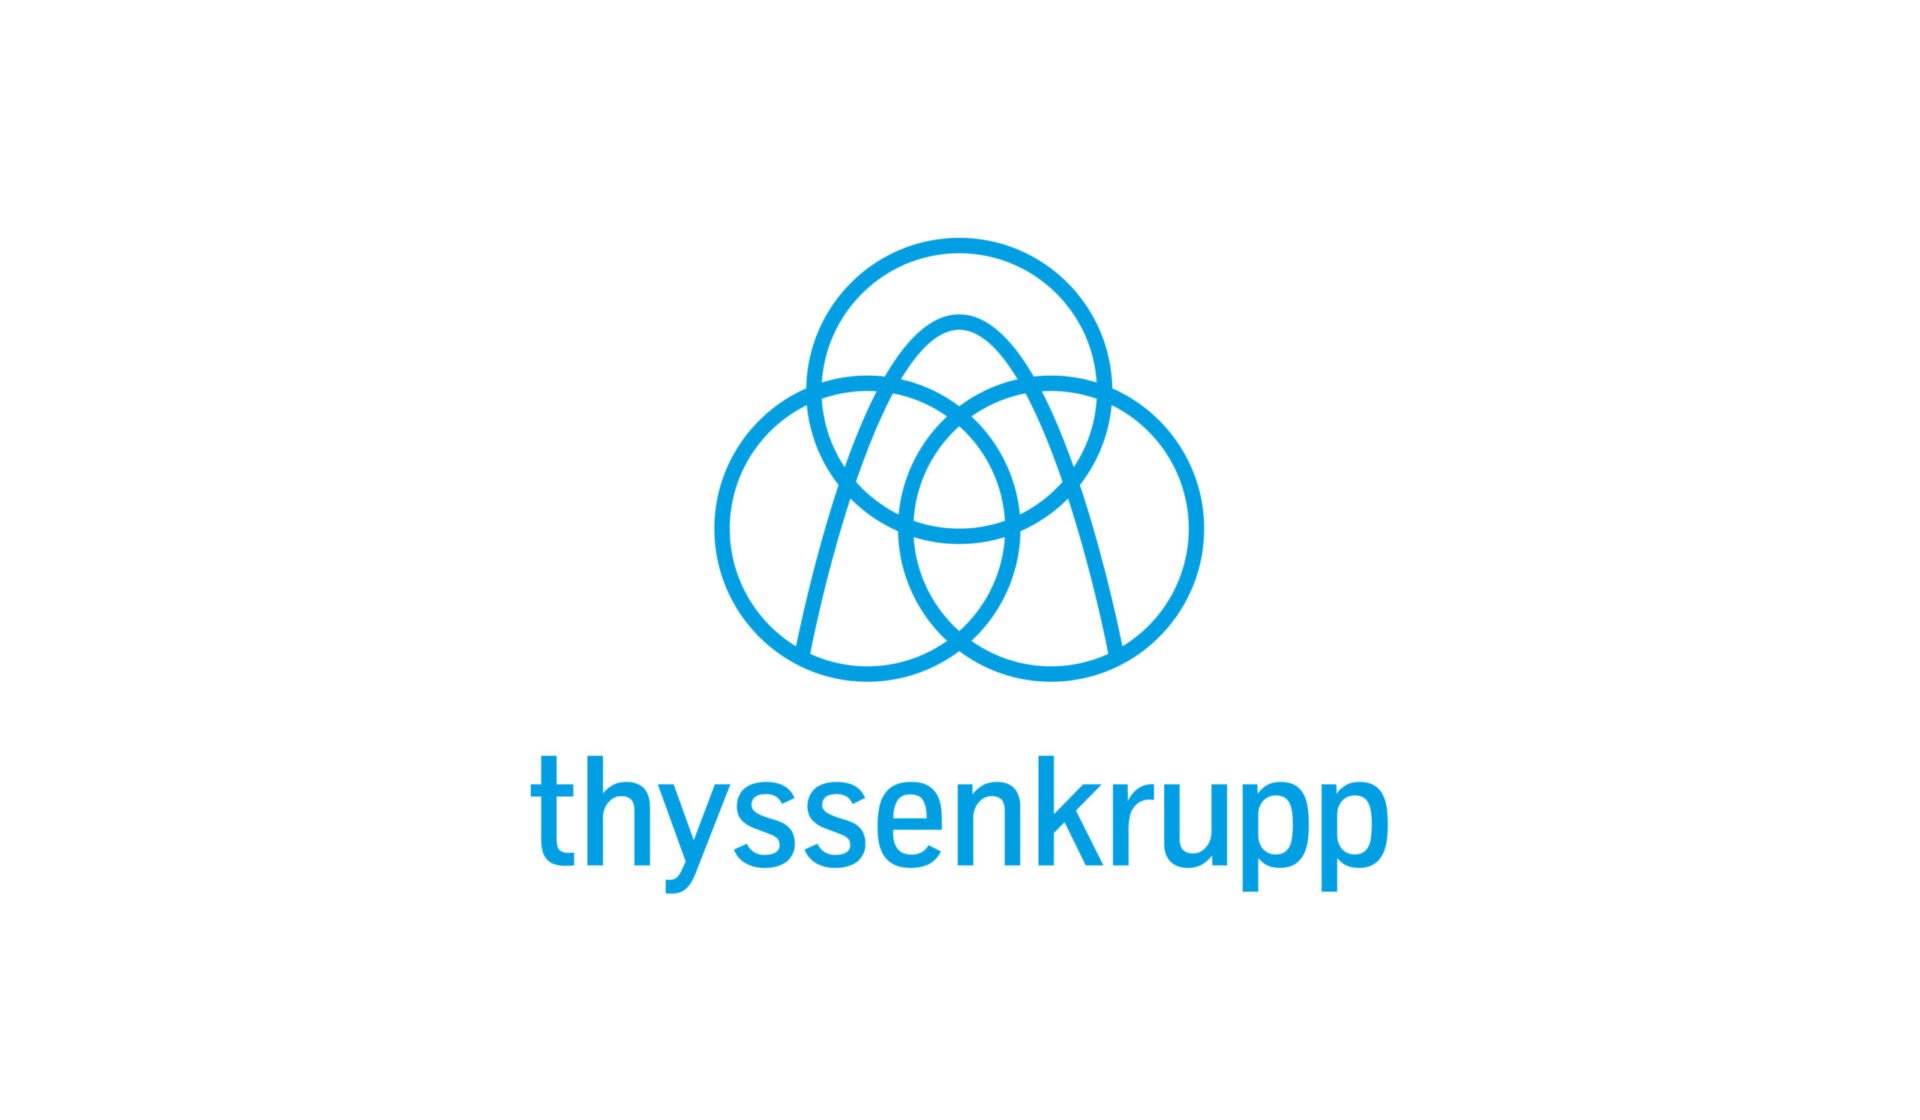 Thyssenkrupp logo with blue intertwined circles and lowercase text